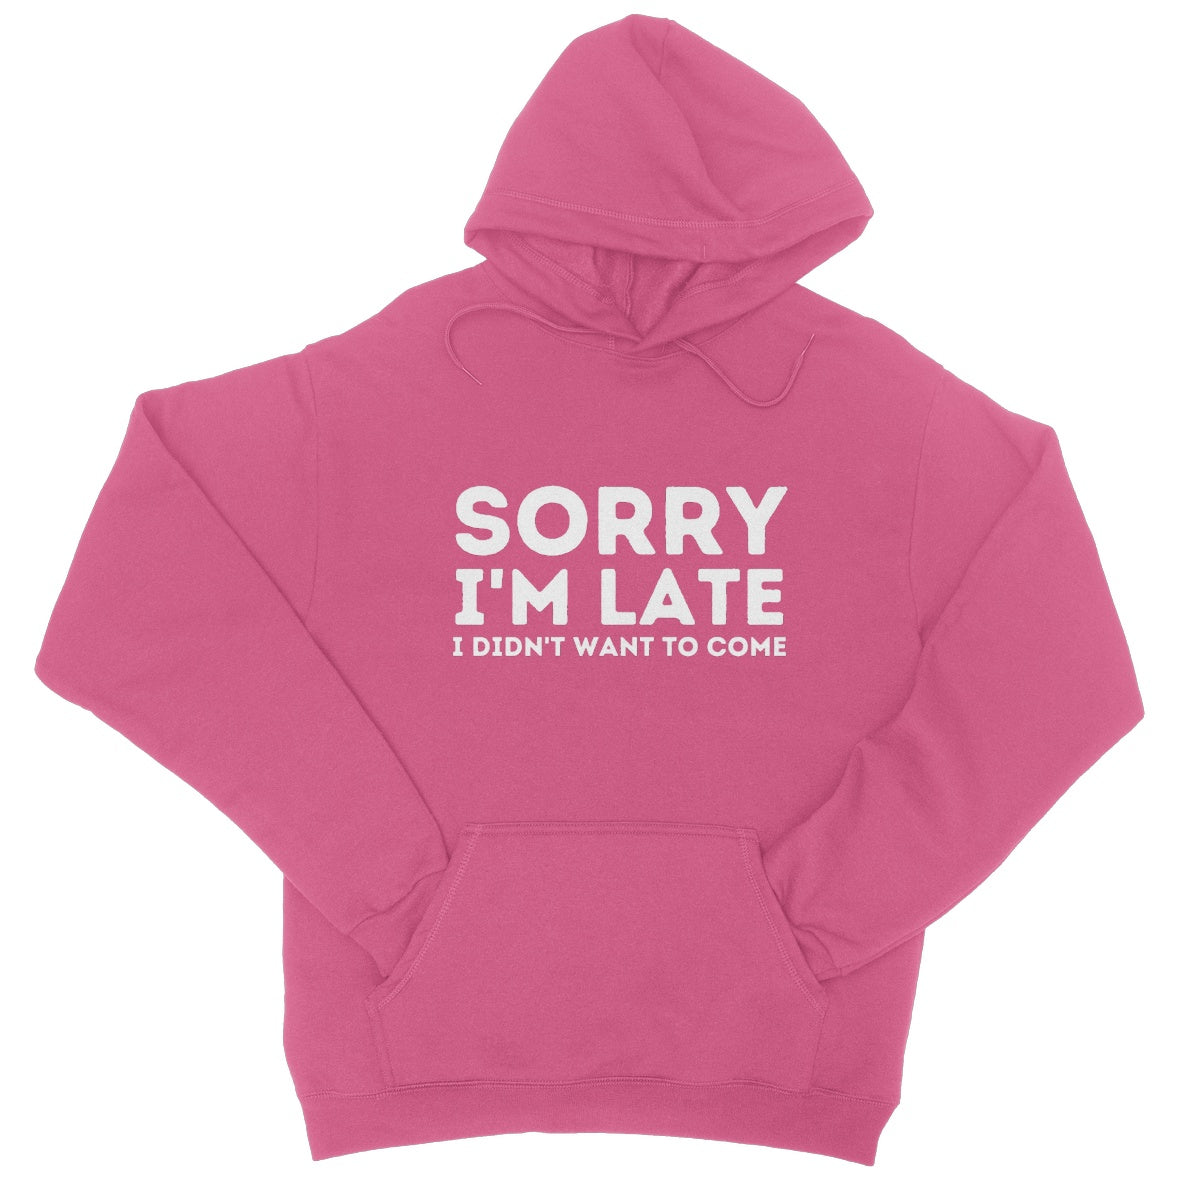 sorry I'm late I didn't want to come hoodie pink